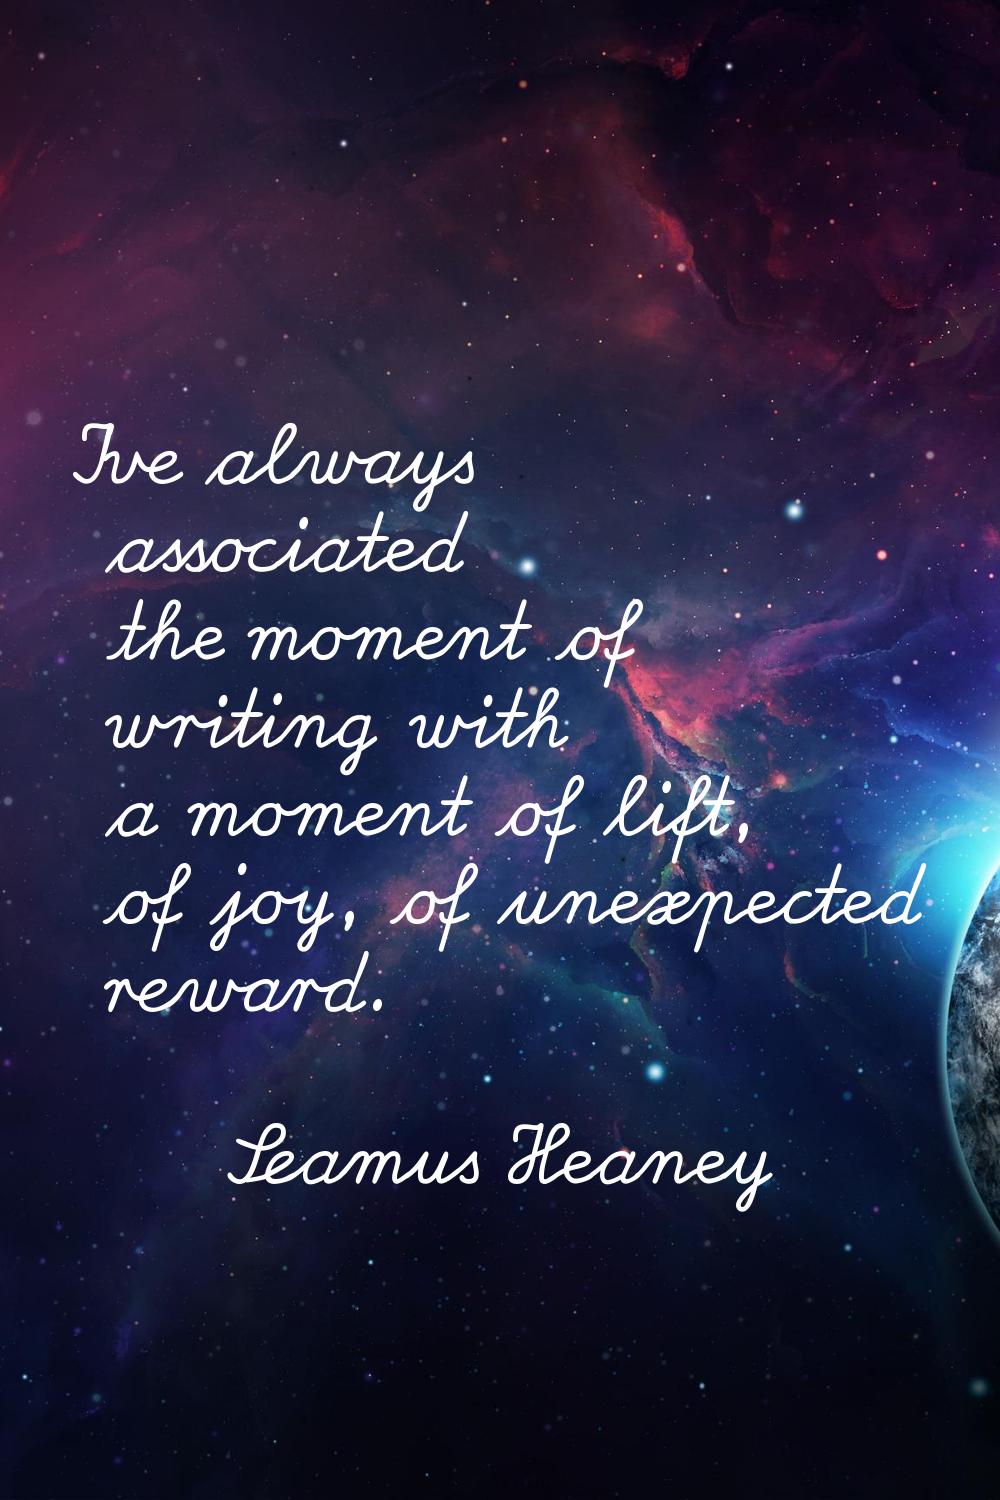 I've always associated the moment of writing with a moment of lift, of joy, of unexpected reward.